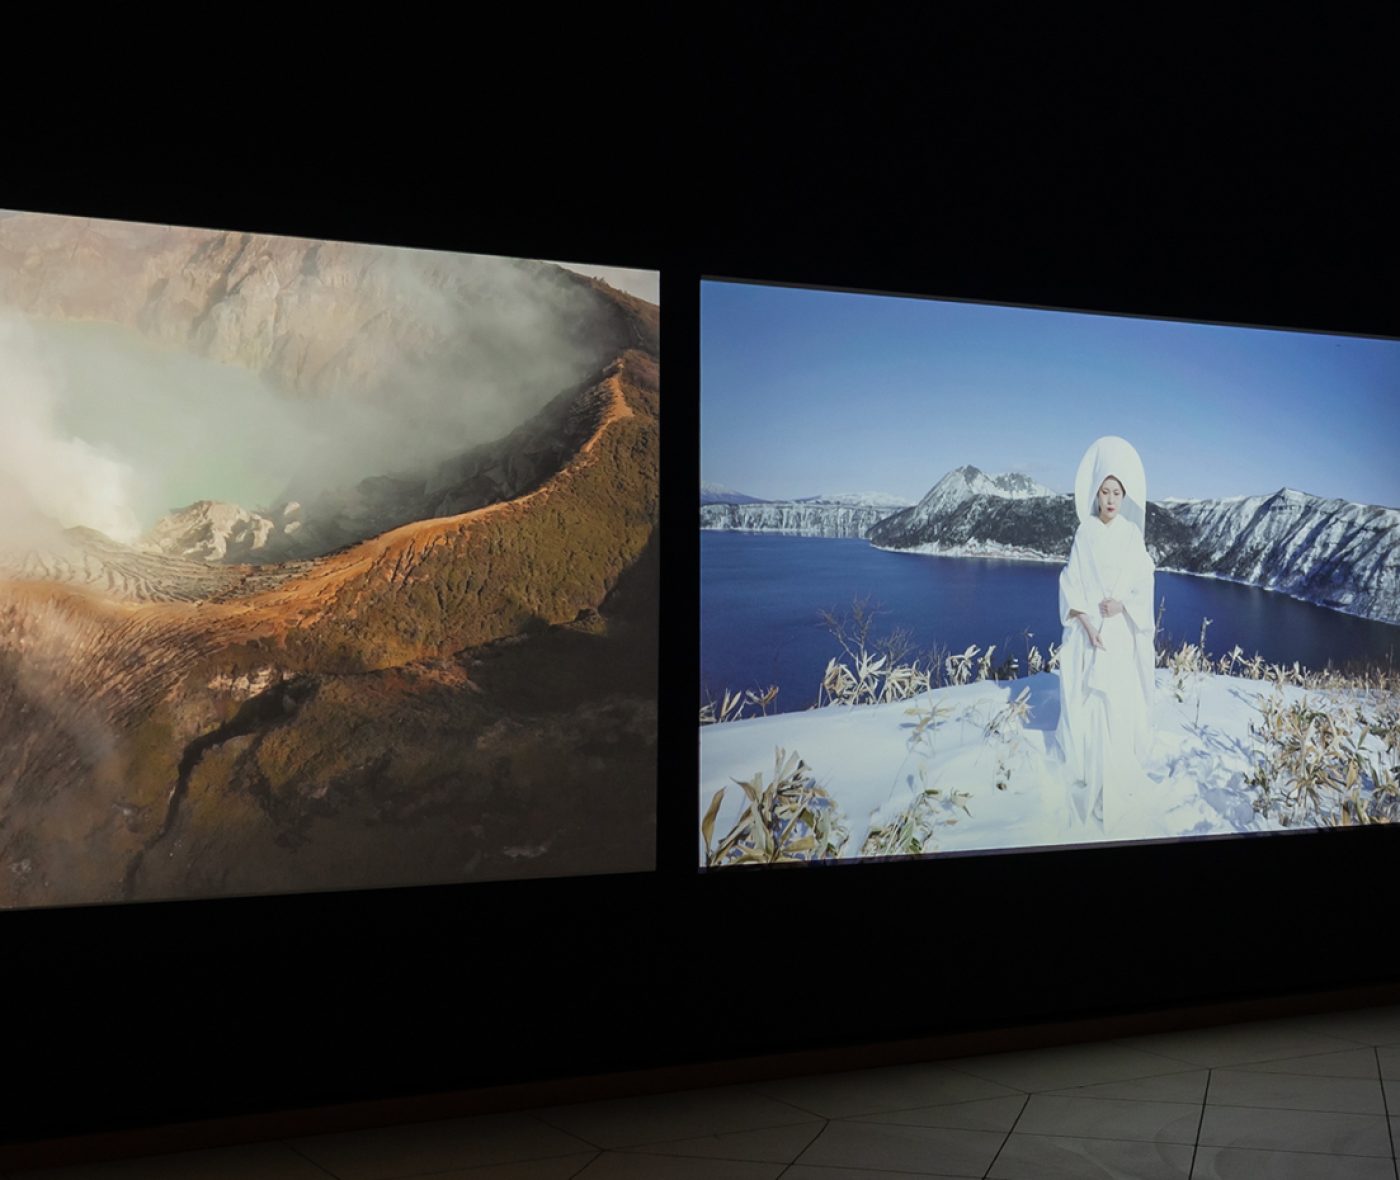 A three-channel video projection shows a central woman in white in and beside landscapes of clouds, mountains, and bodies of water